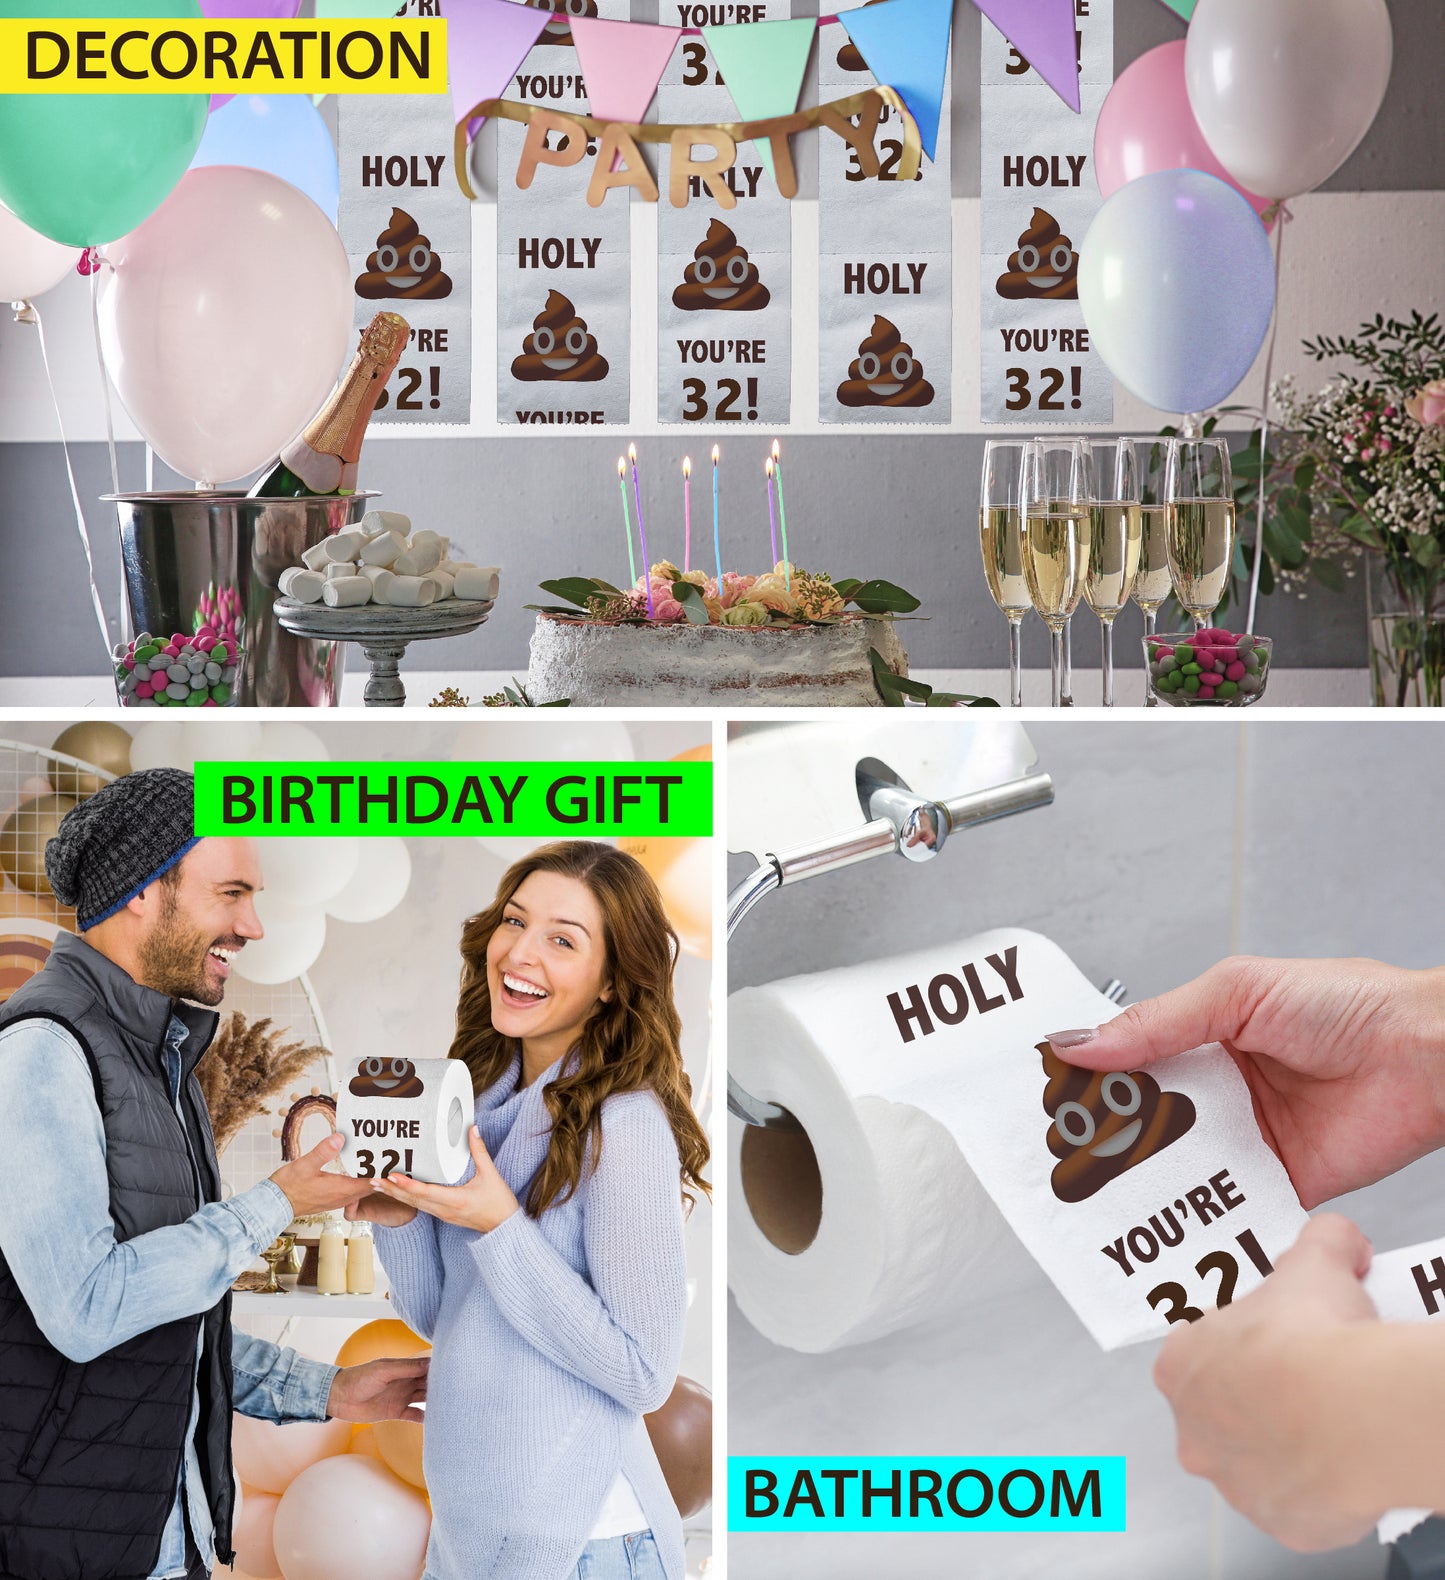 Printed TP Holy Poop You're 32 Funny Toilet Paper Roll Birthday Party Gag Gift